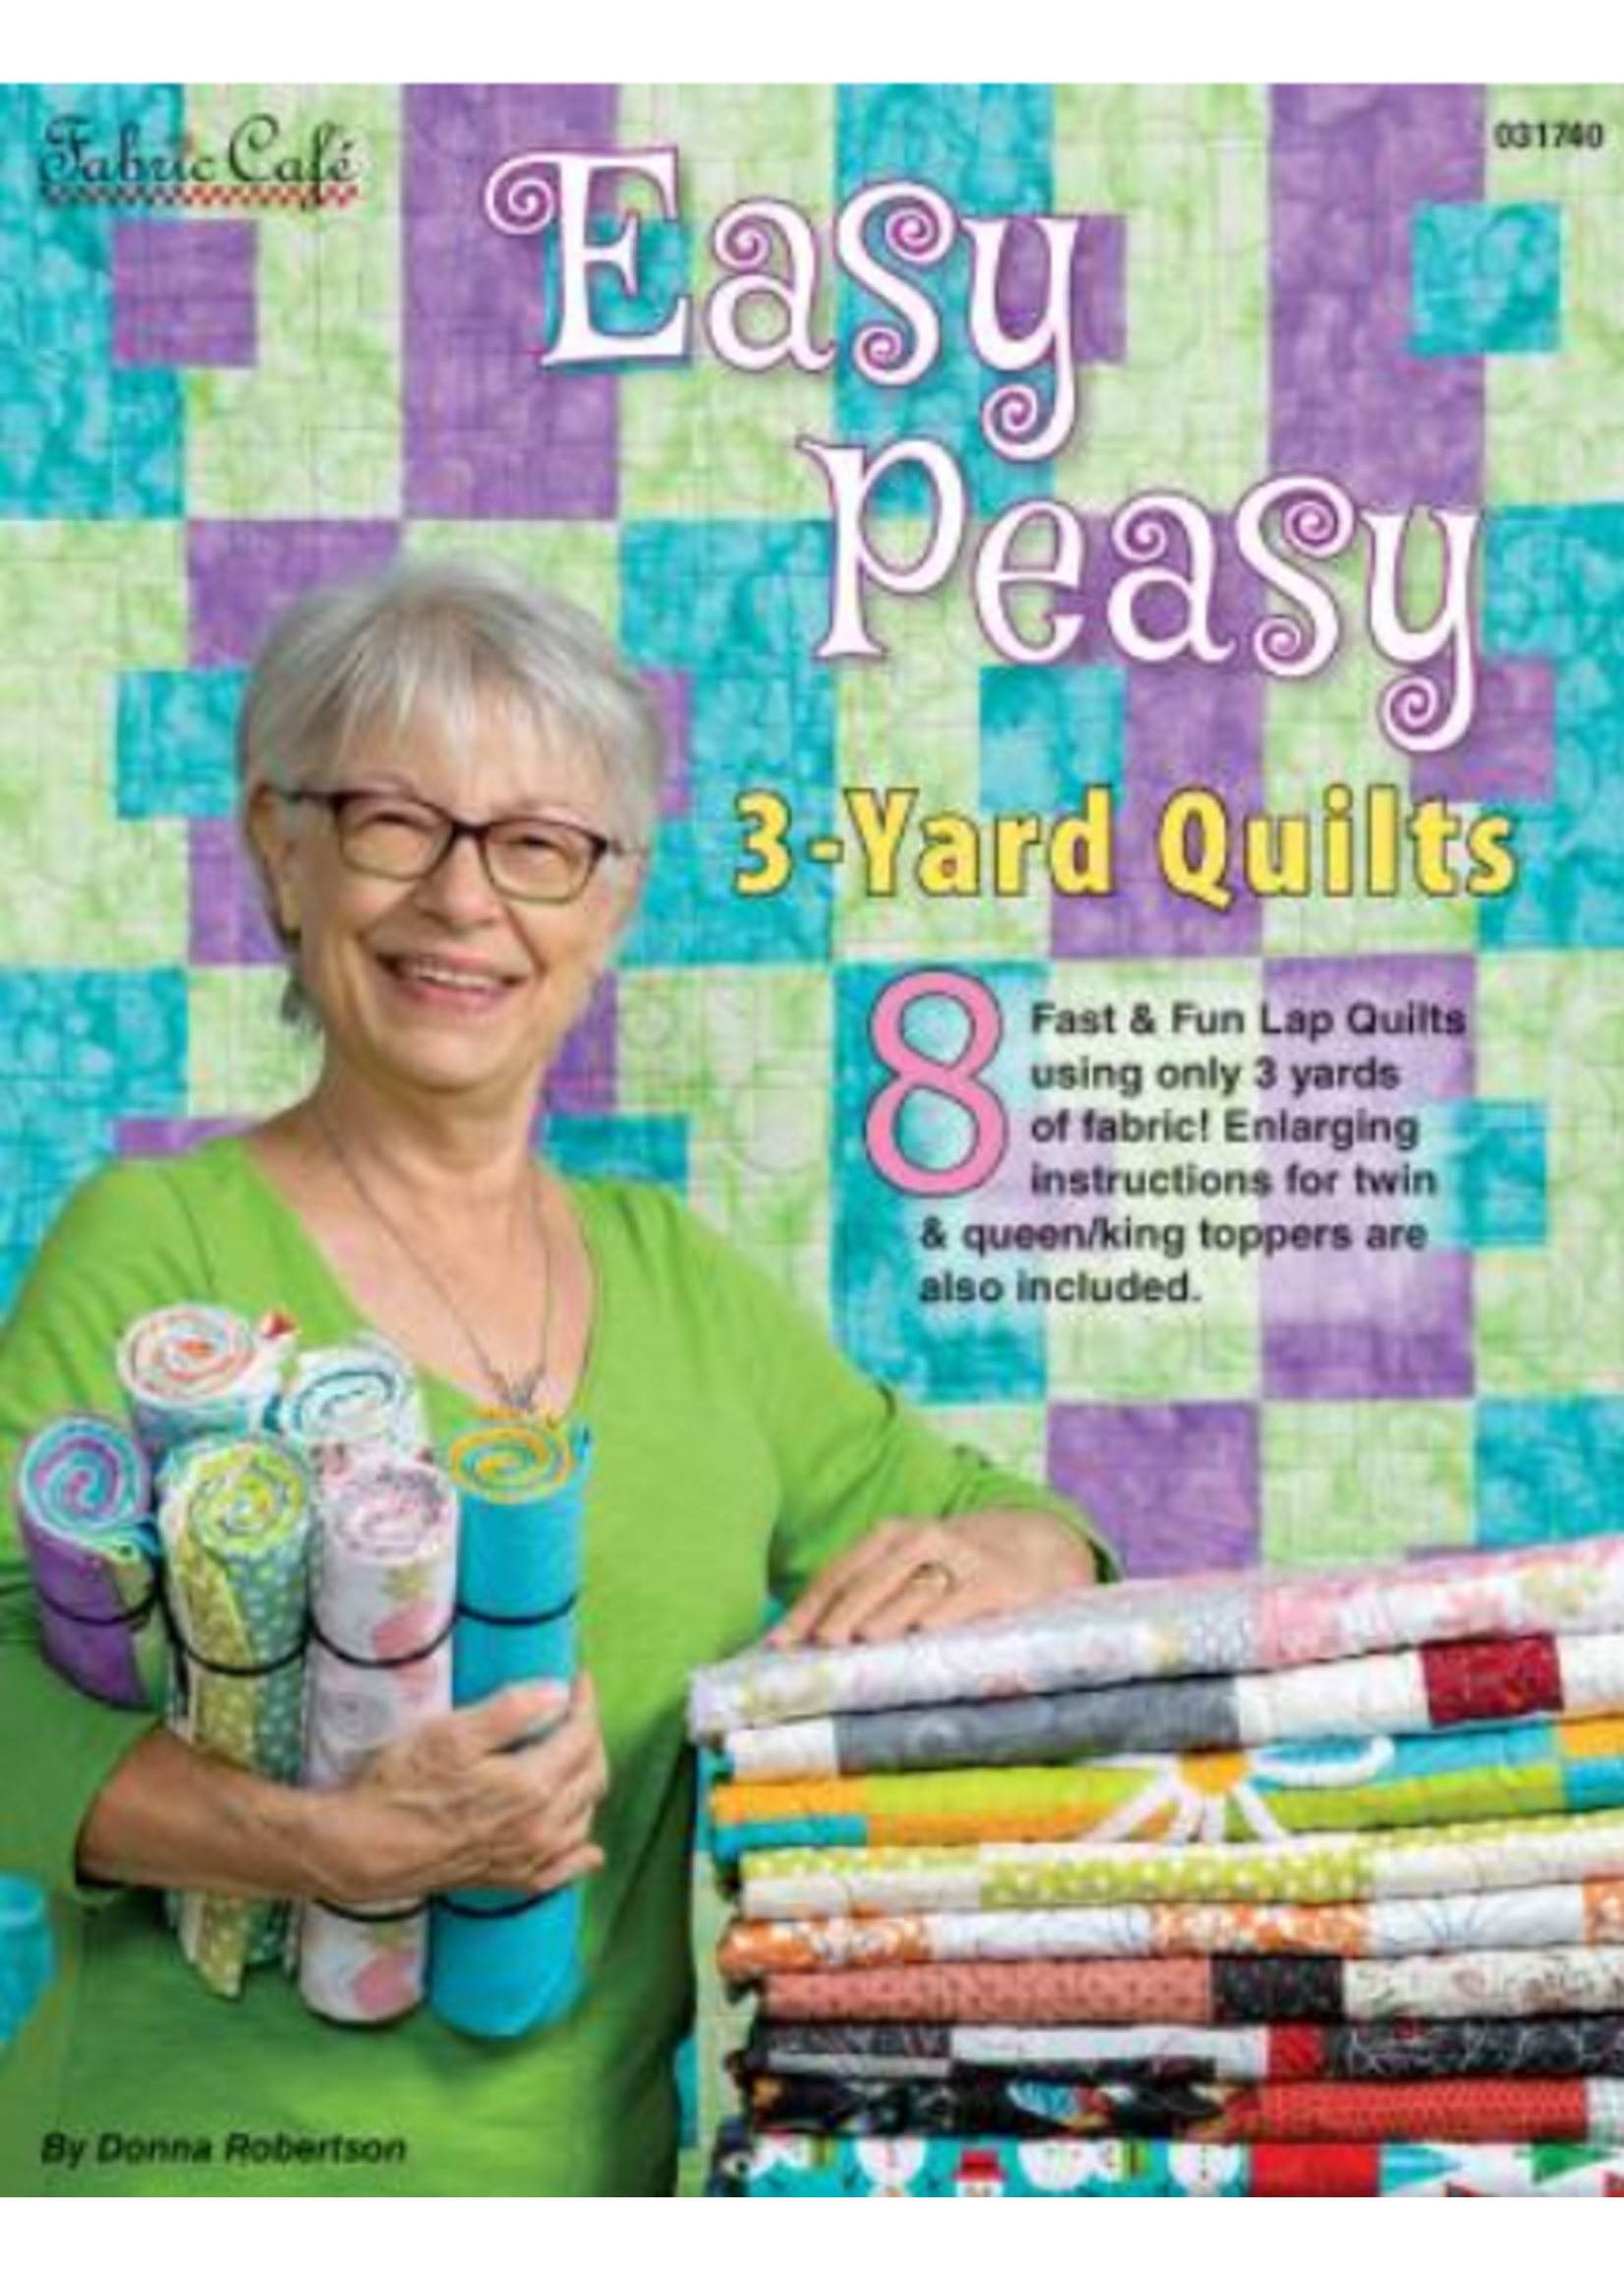 Fabric Cafe Easy Peasy 3-Yard Quilts